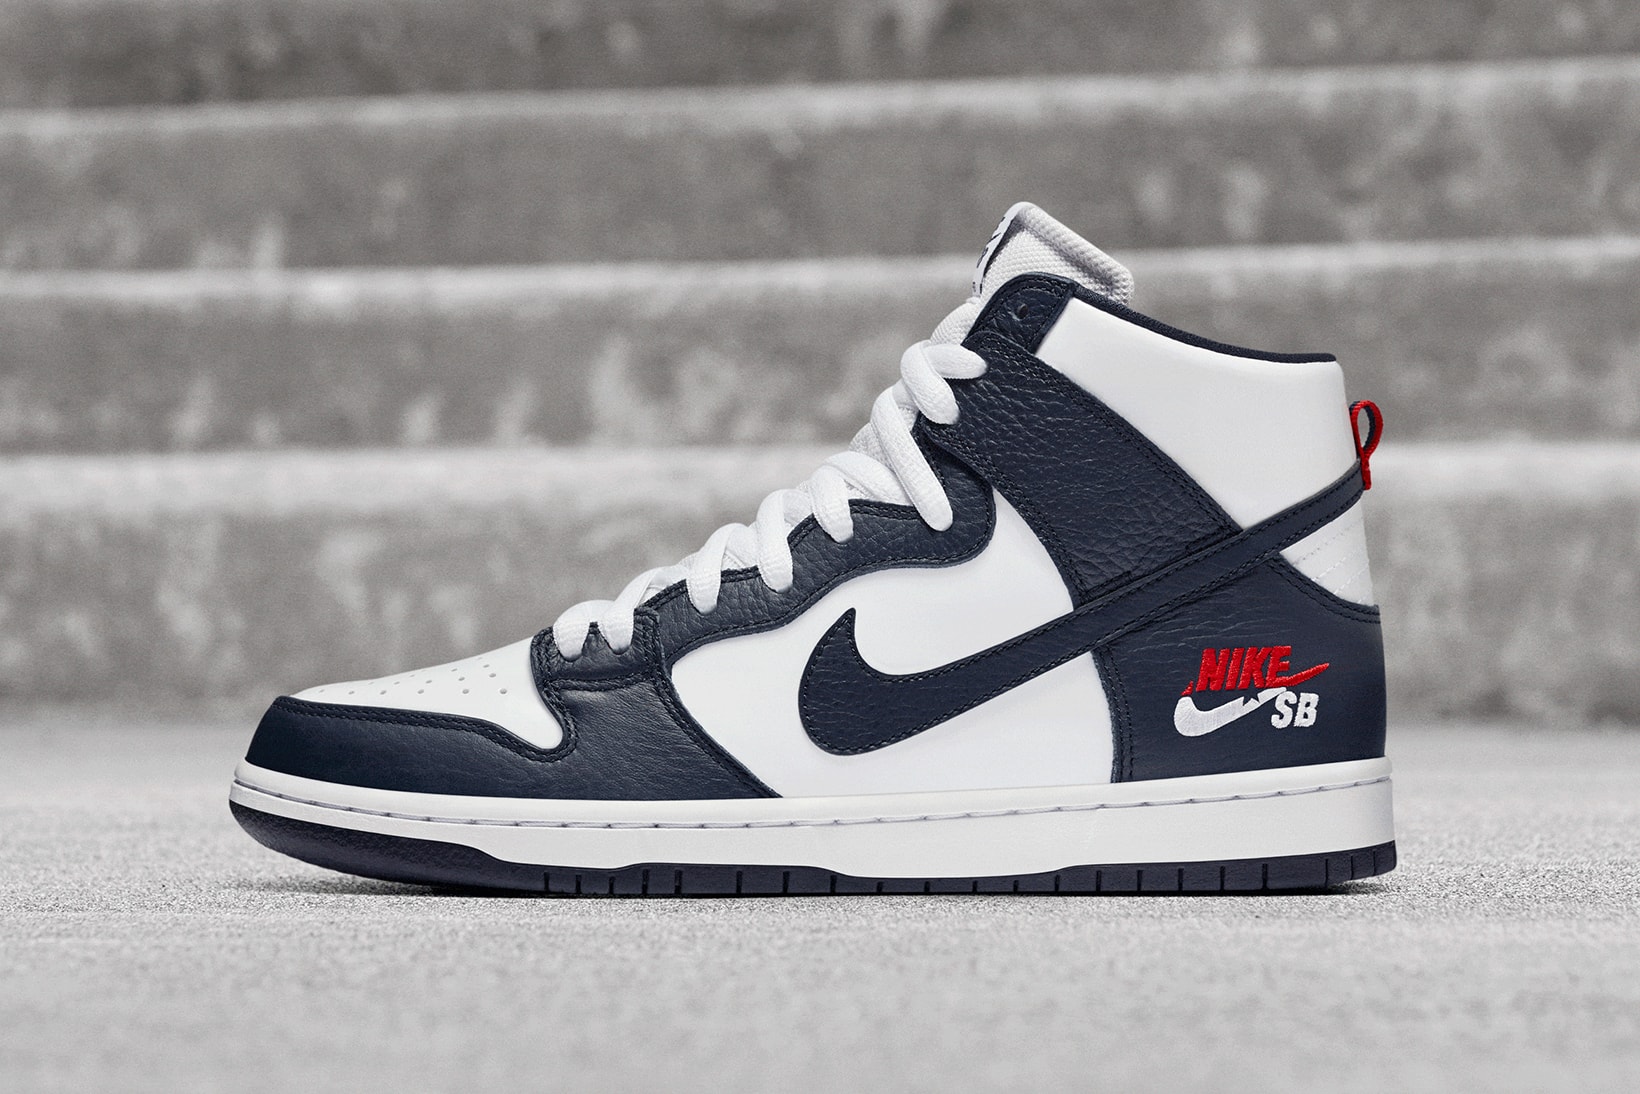 Nike SB Dunk High Pro 92 Blue Navy Red White Star Logo 2017 November 2 Release Date Info Sneakers Shoes Footwear